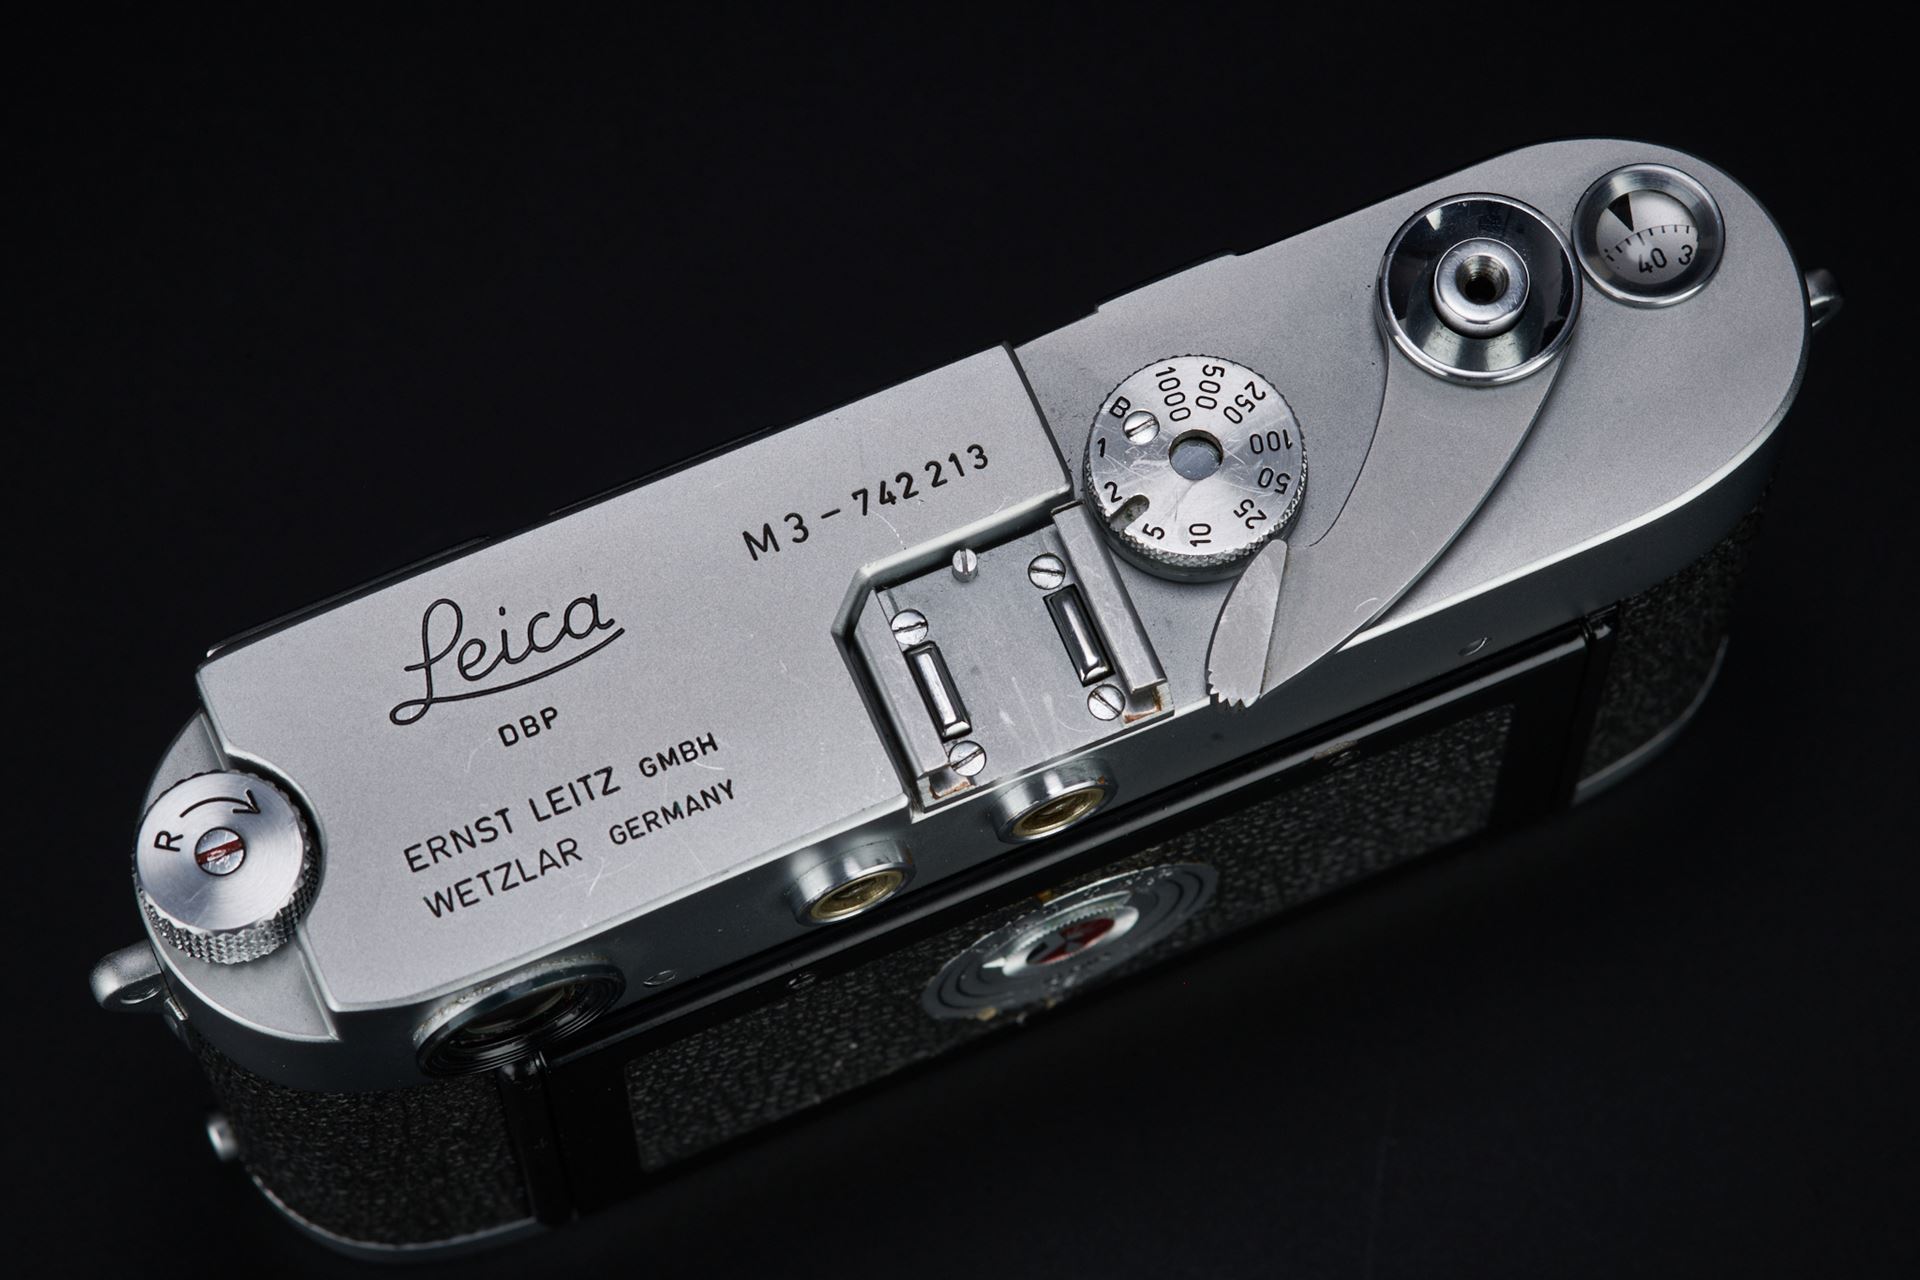 Picture of Leica M3 Double Stroke Chrome